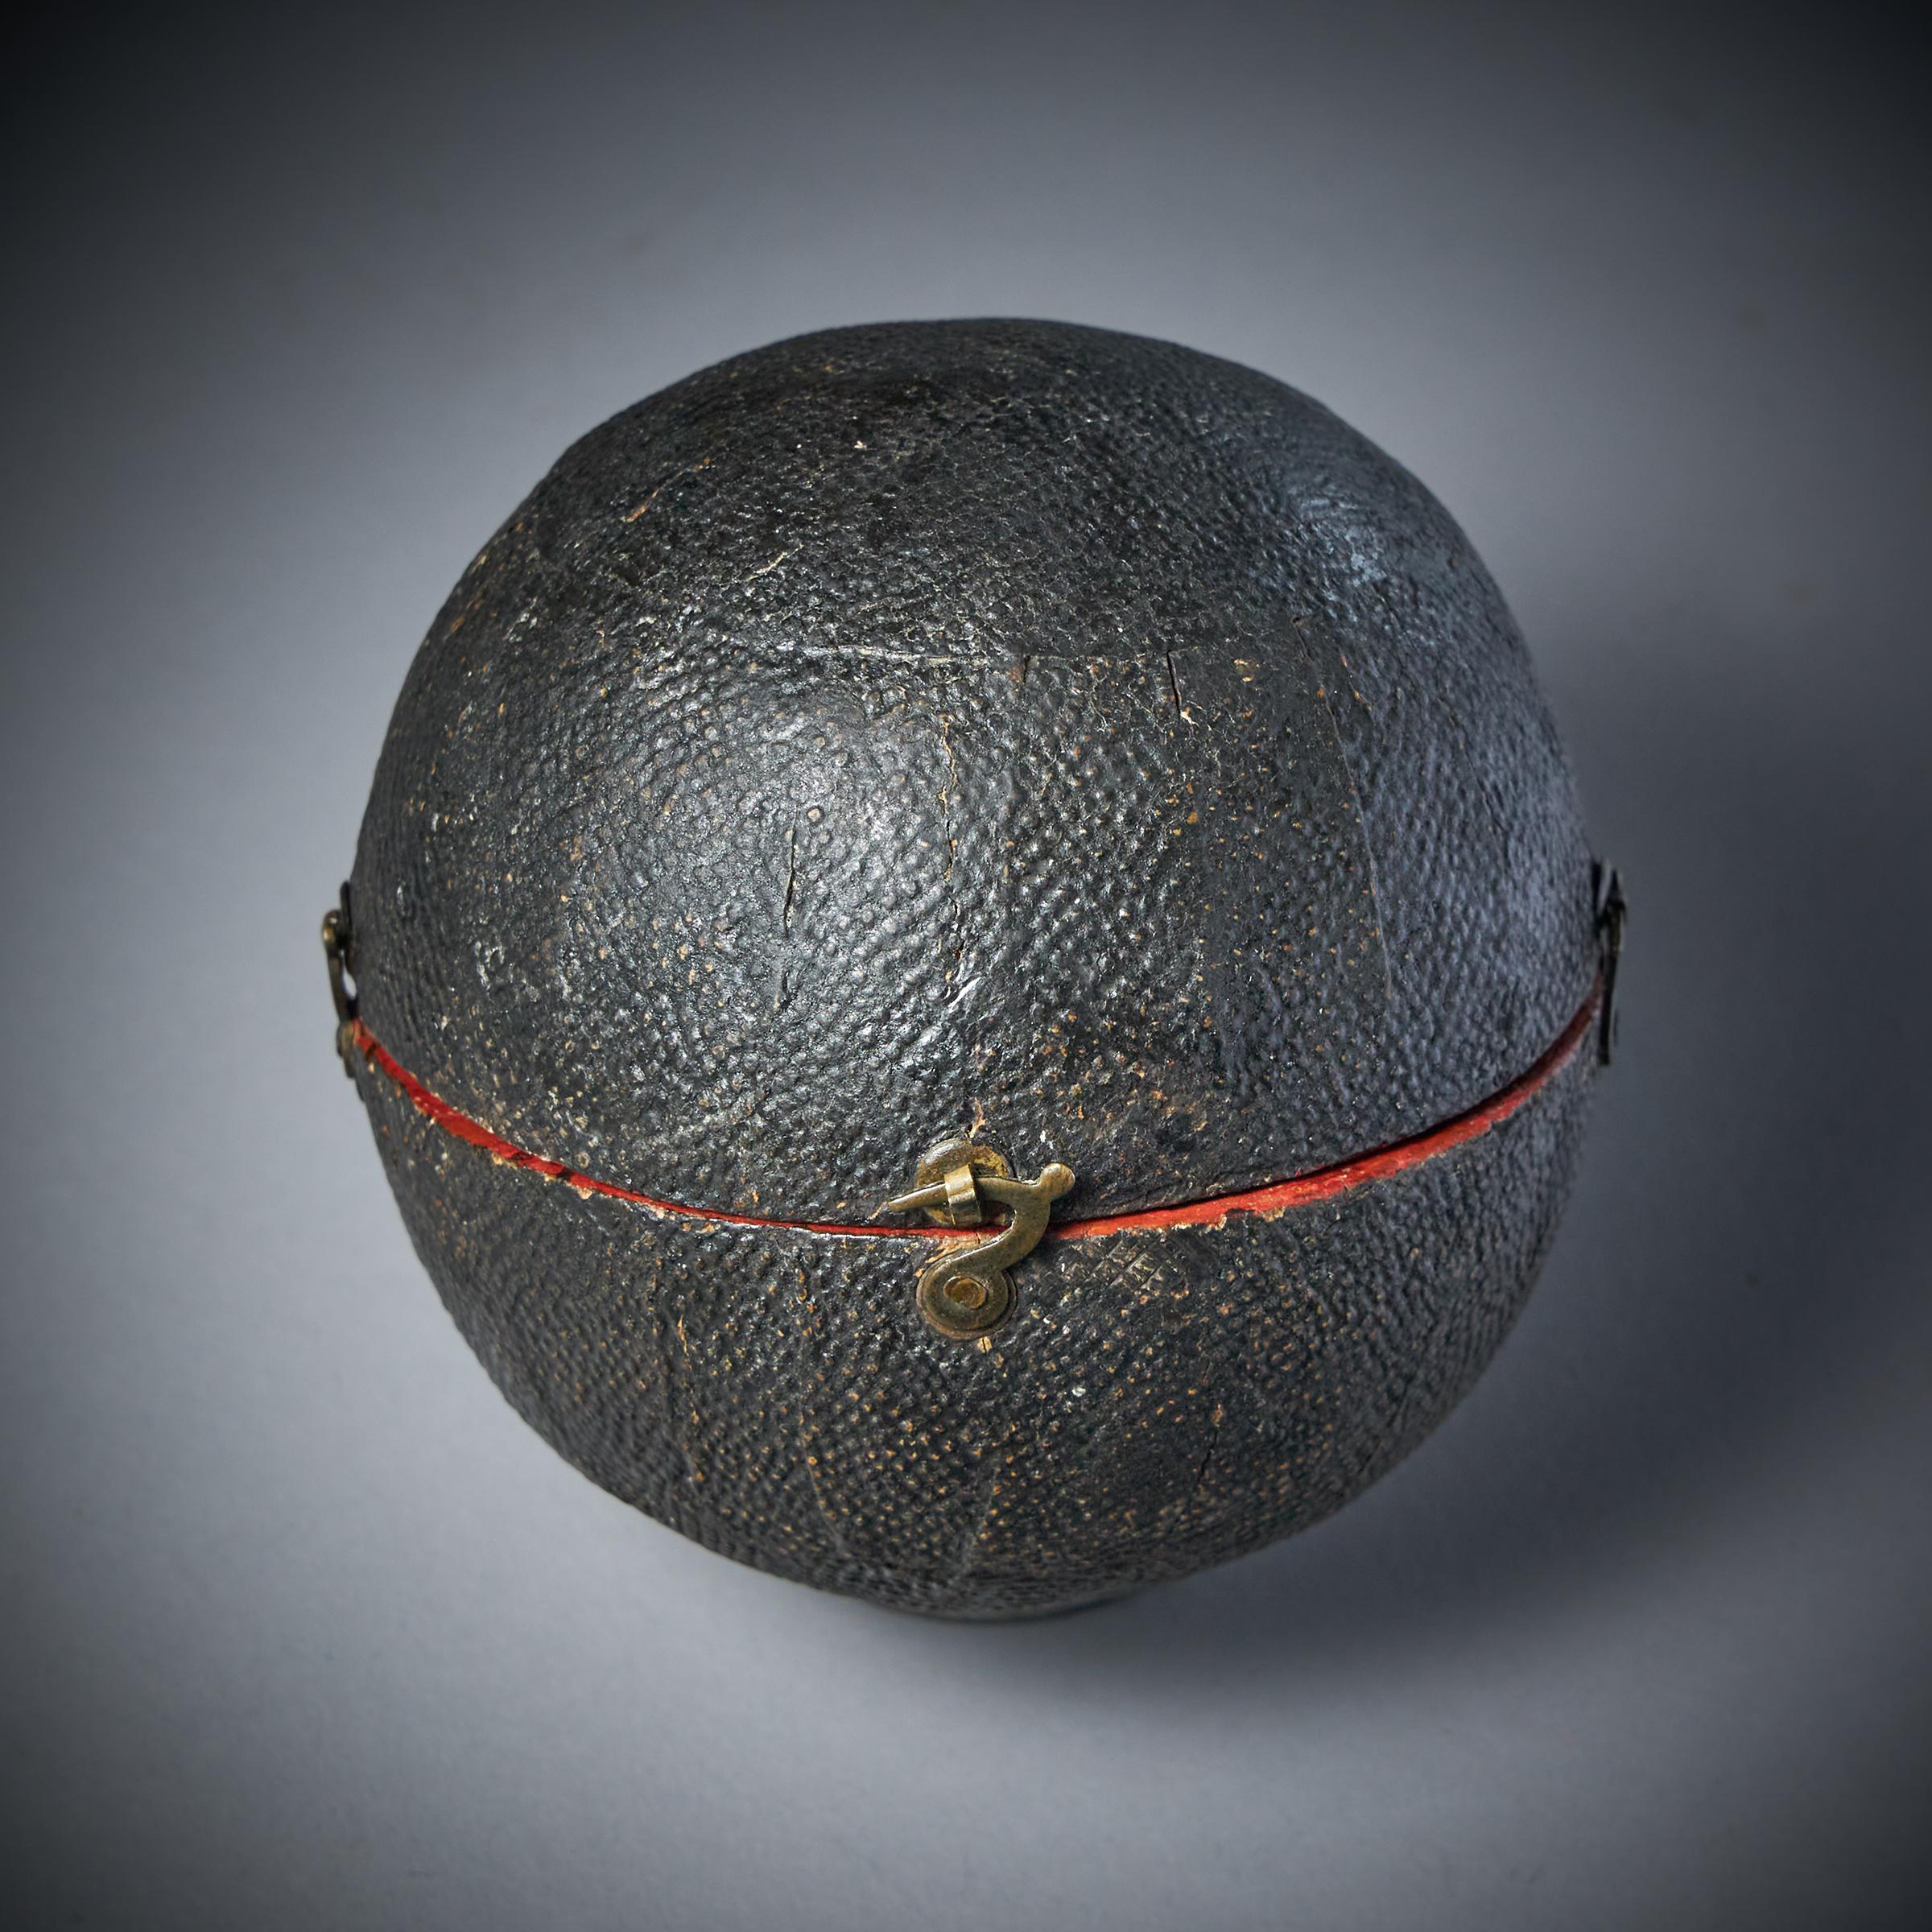 A Rare George III pocket globe by T. Harris and Son, London, 1813. Housed in the original sharkskin case.

A fasinsting and rare item in wonderful condition. 

The terrestrial globe inscribed 'New Terrestrial Globe By T.Harris and Sons 1813'